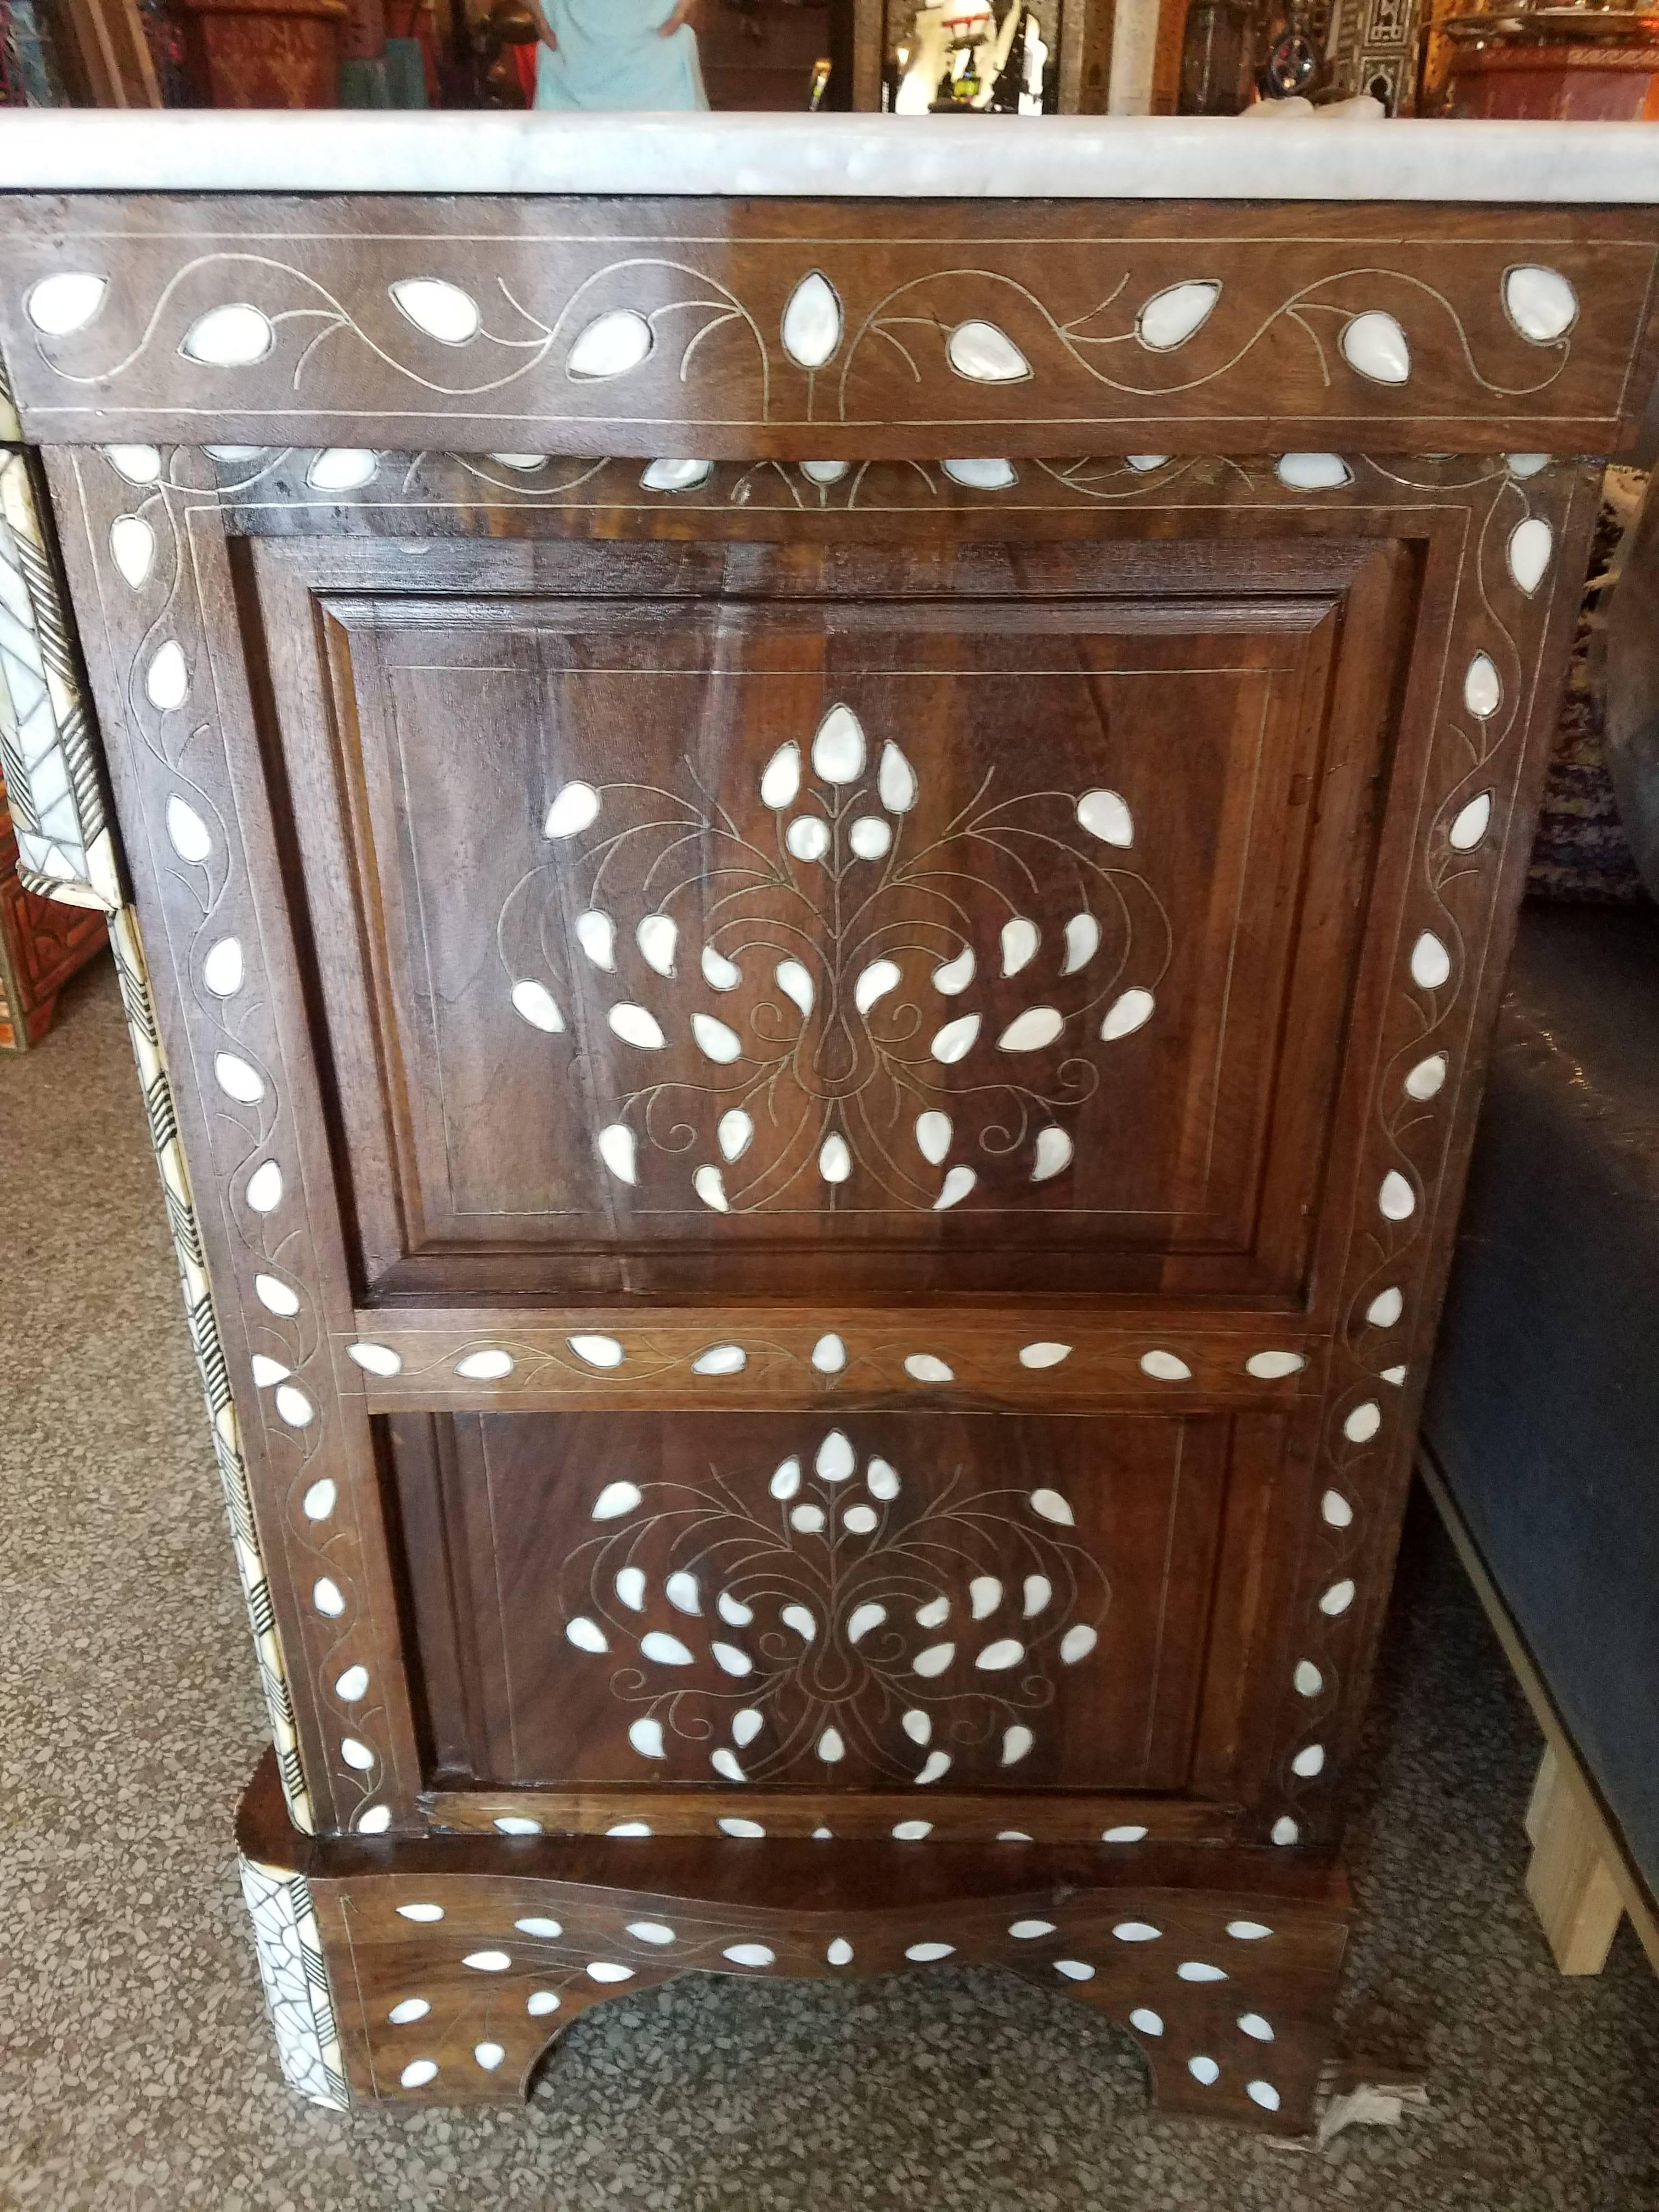 Syrian style mother-of-pearl dresser or cabinet made in Morocco by a fine Syrian artisan. Color is Ivory (off white). Beautiful inlay throughout. Amazing handcraftsmanship. Definitely a conversation piece. Three easy to open drawers and a beautiful